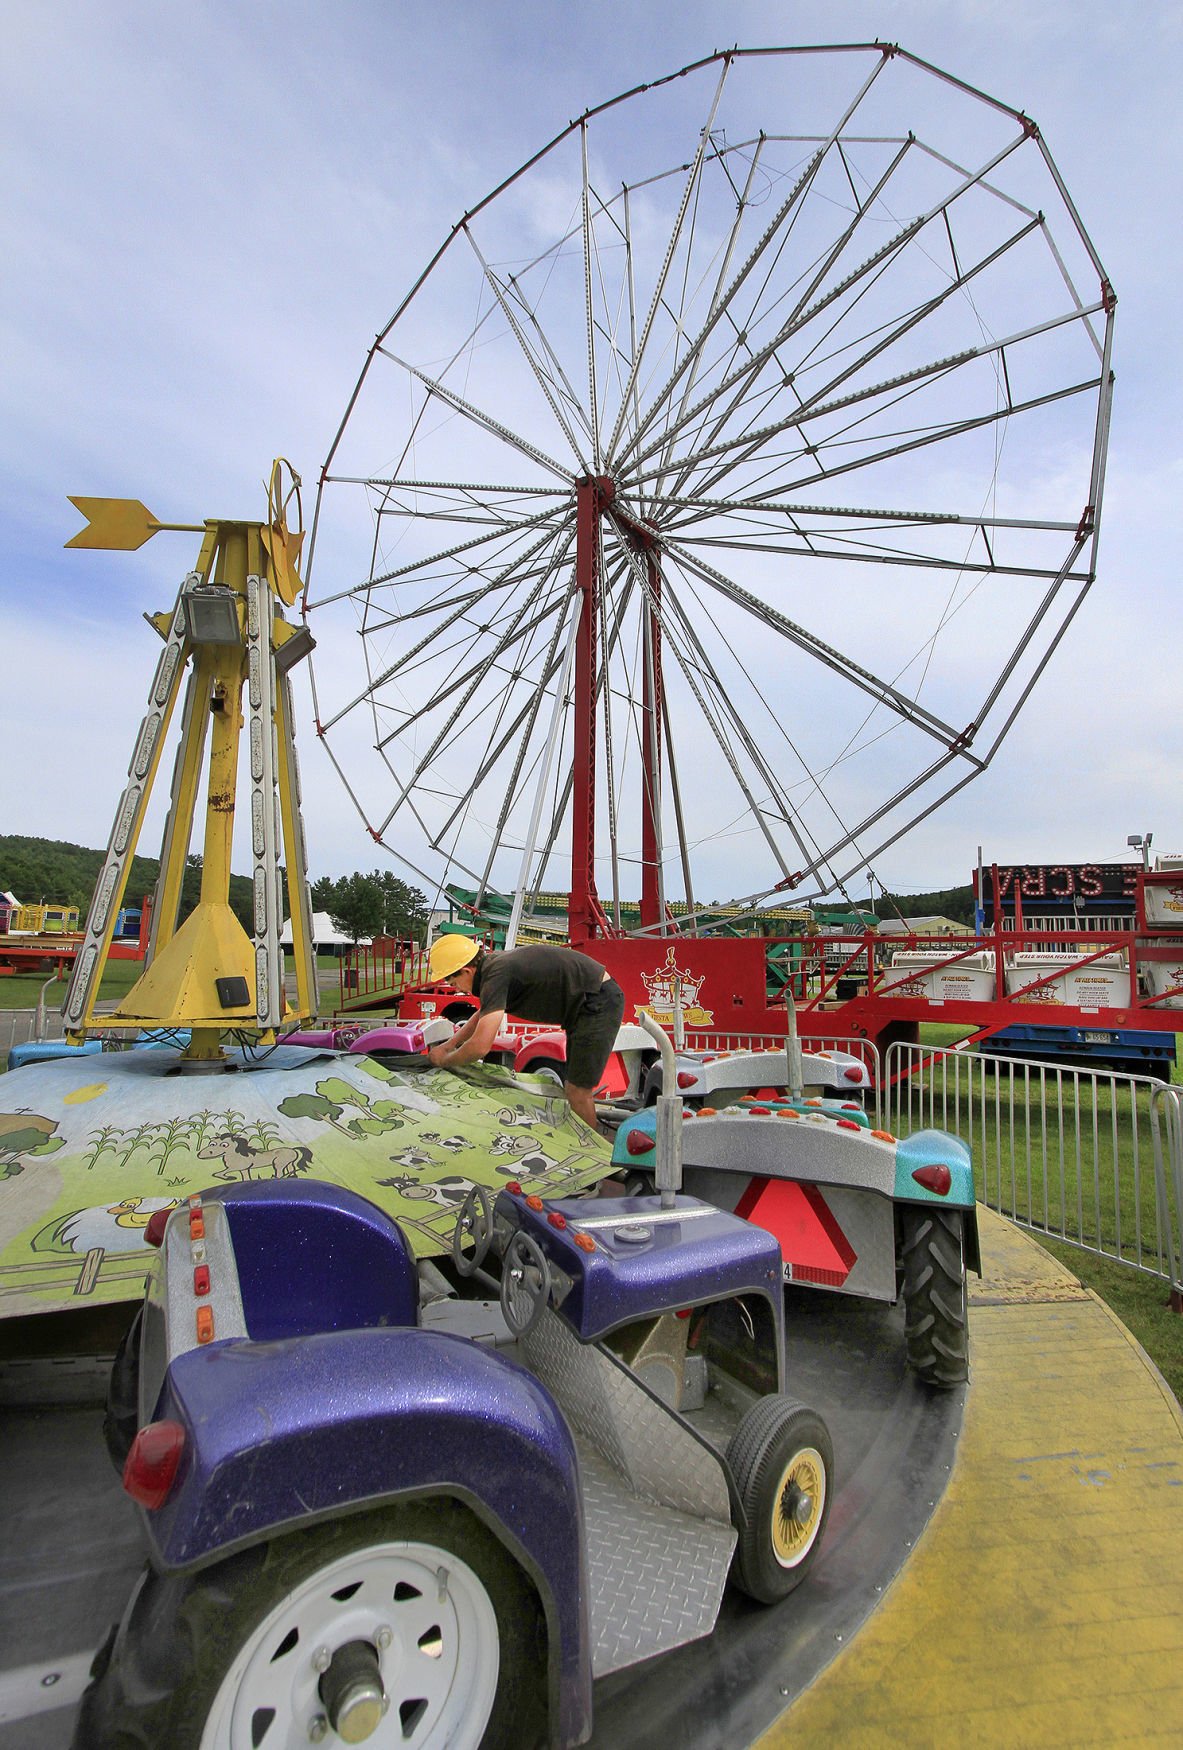 Toasting the timehonored Tradition a focus as Cheshire Fair returns